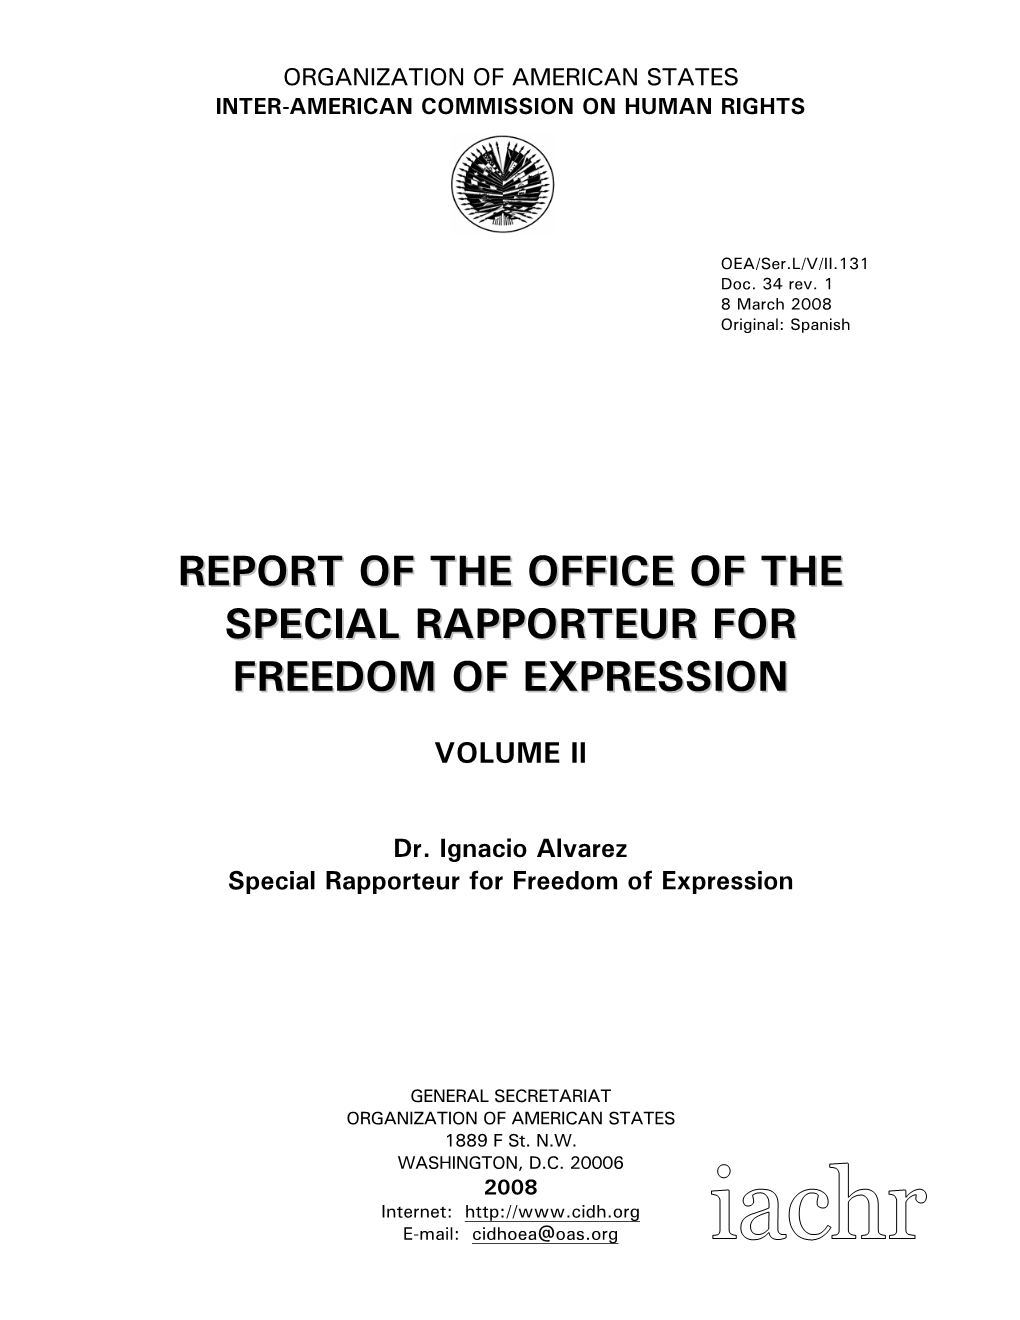 Report of the Office of the Special Rapporteur for Freedom of Expression 2007